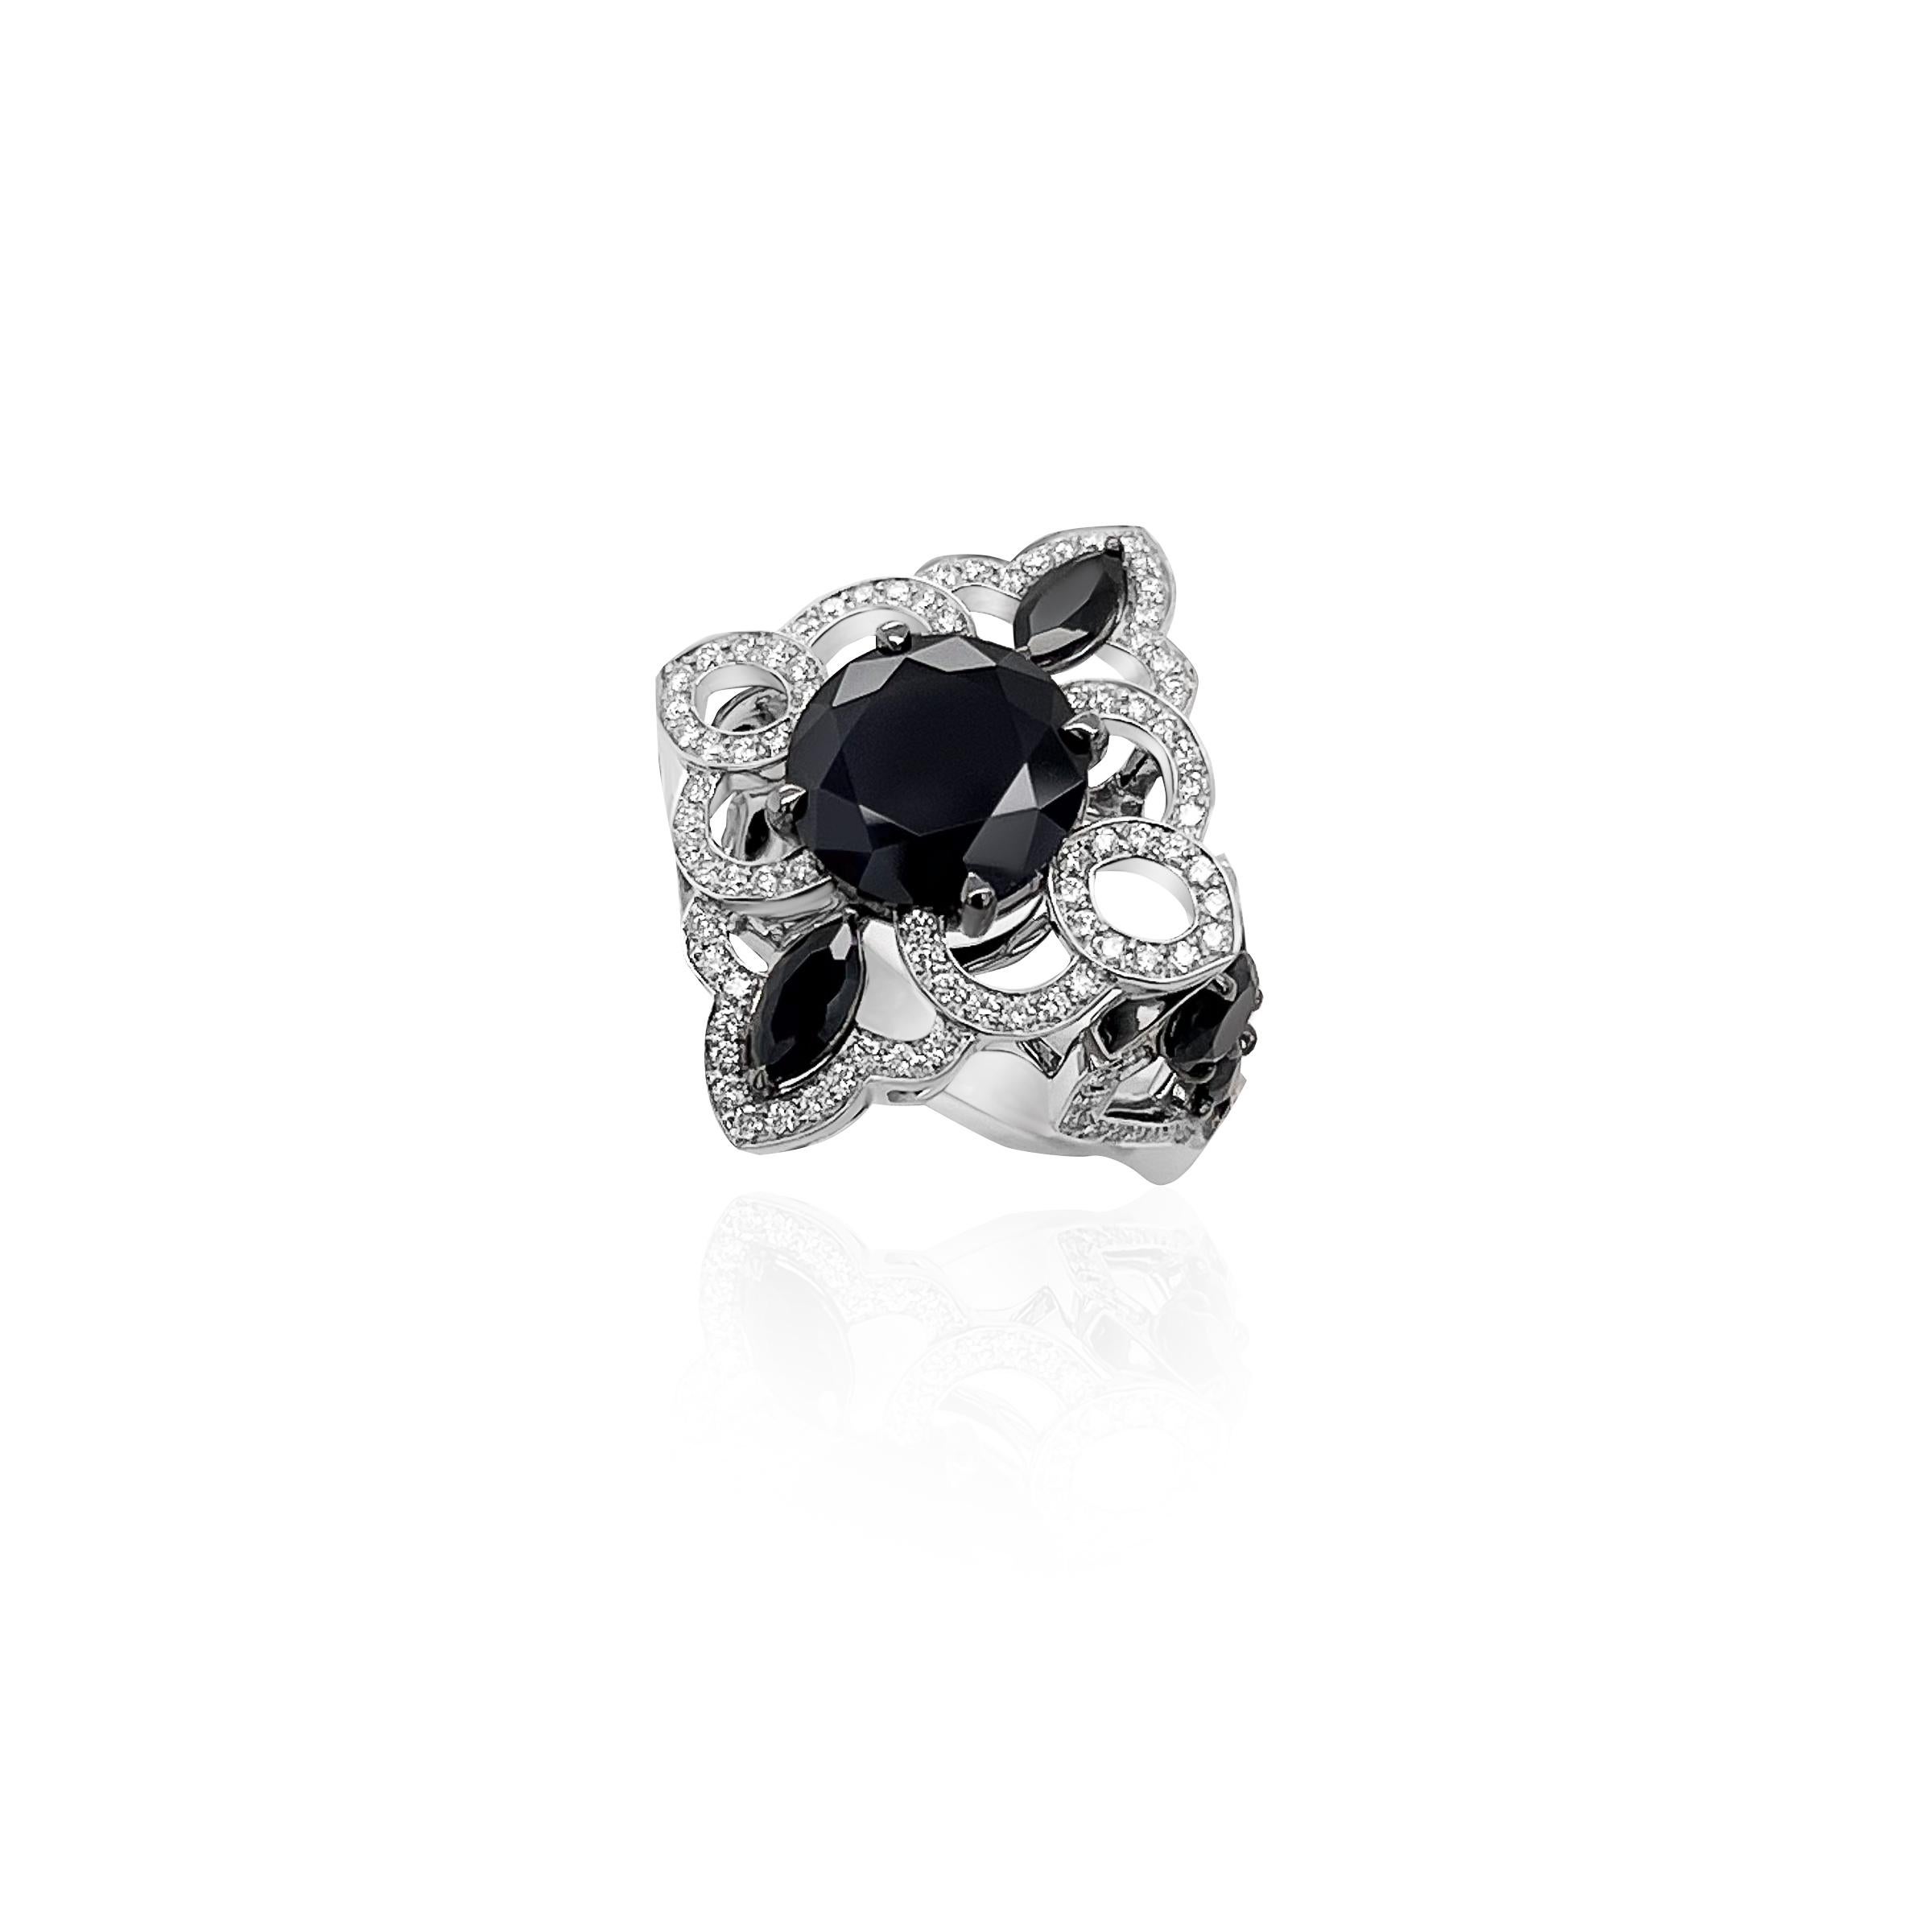 This exquisite ring is crafted with meticulous attention to detail, inspired by the glamour and precision characteristic of the Art Deco era.

At the heart of this ring lie the captivating black spinel center stone weighing 3.720 carats. Surrounding